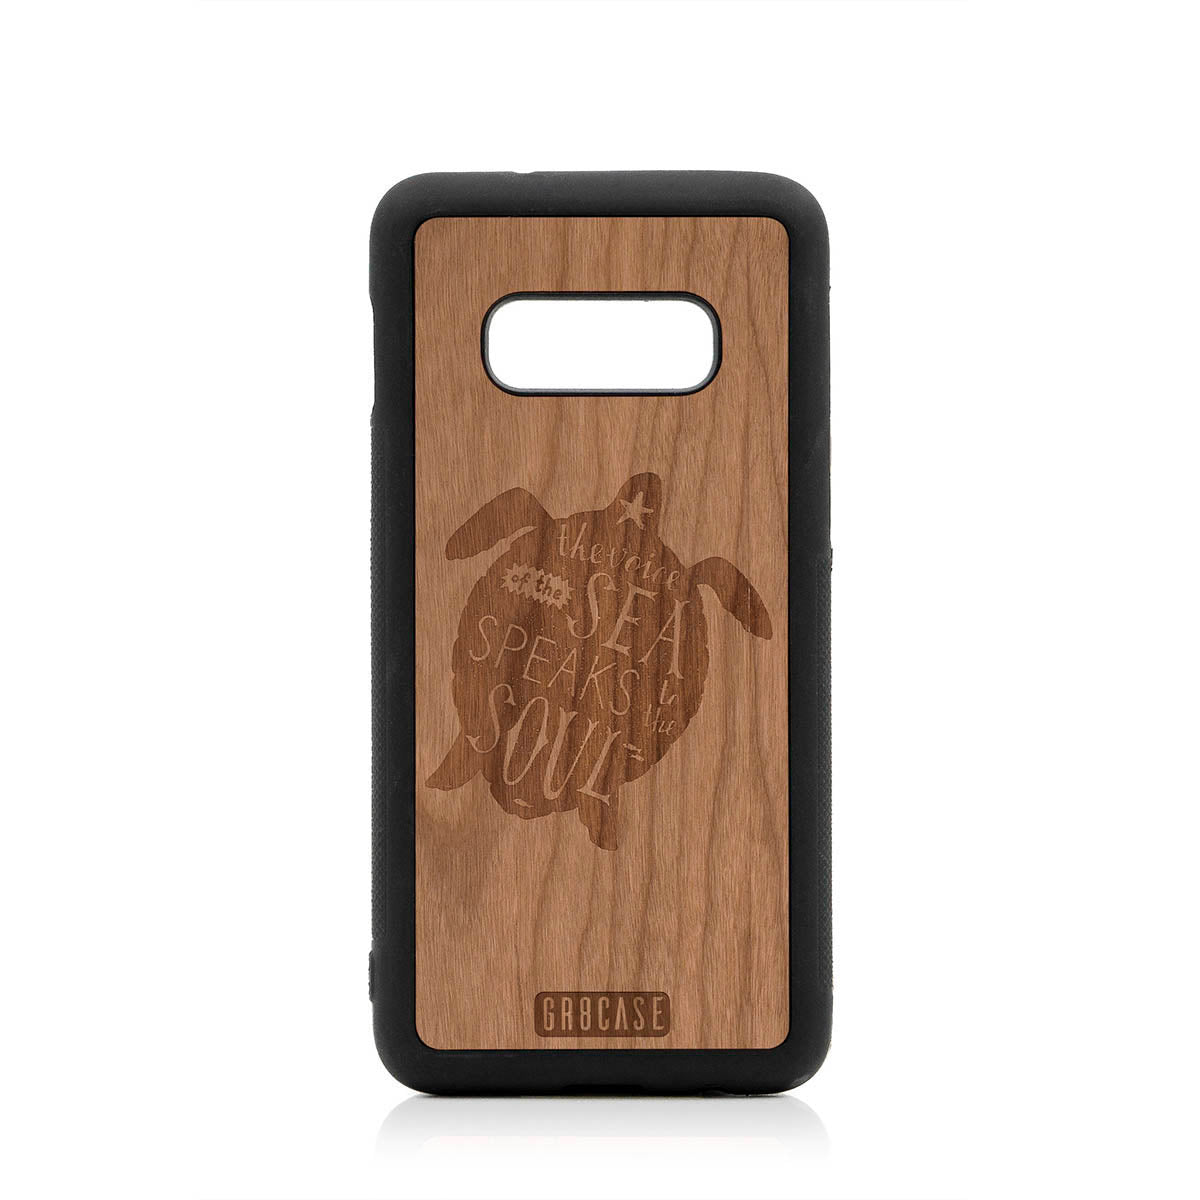 The Voice Of The Sea Speaks To The Soul (Turtle) Design Wood Case For Samsung Galaxy S10E